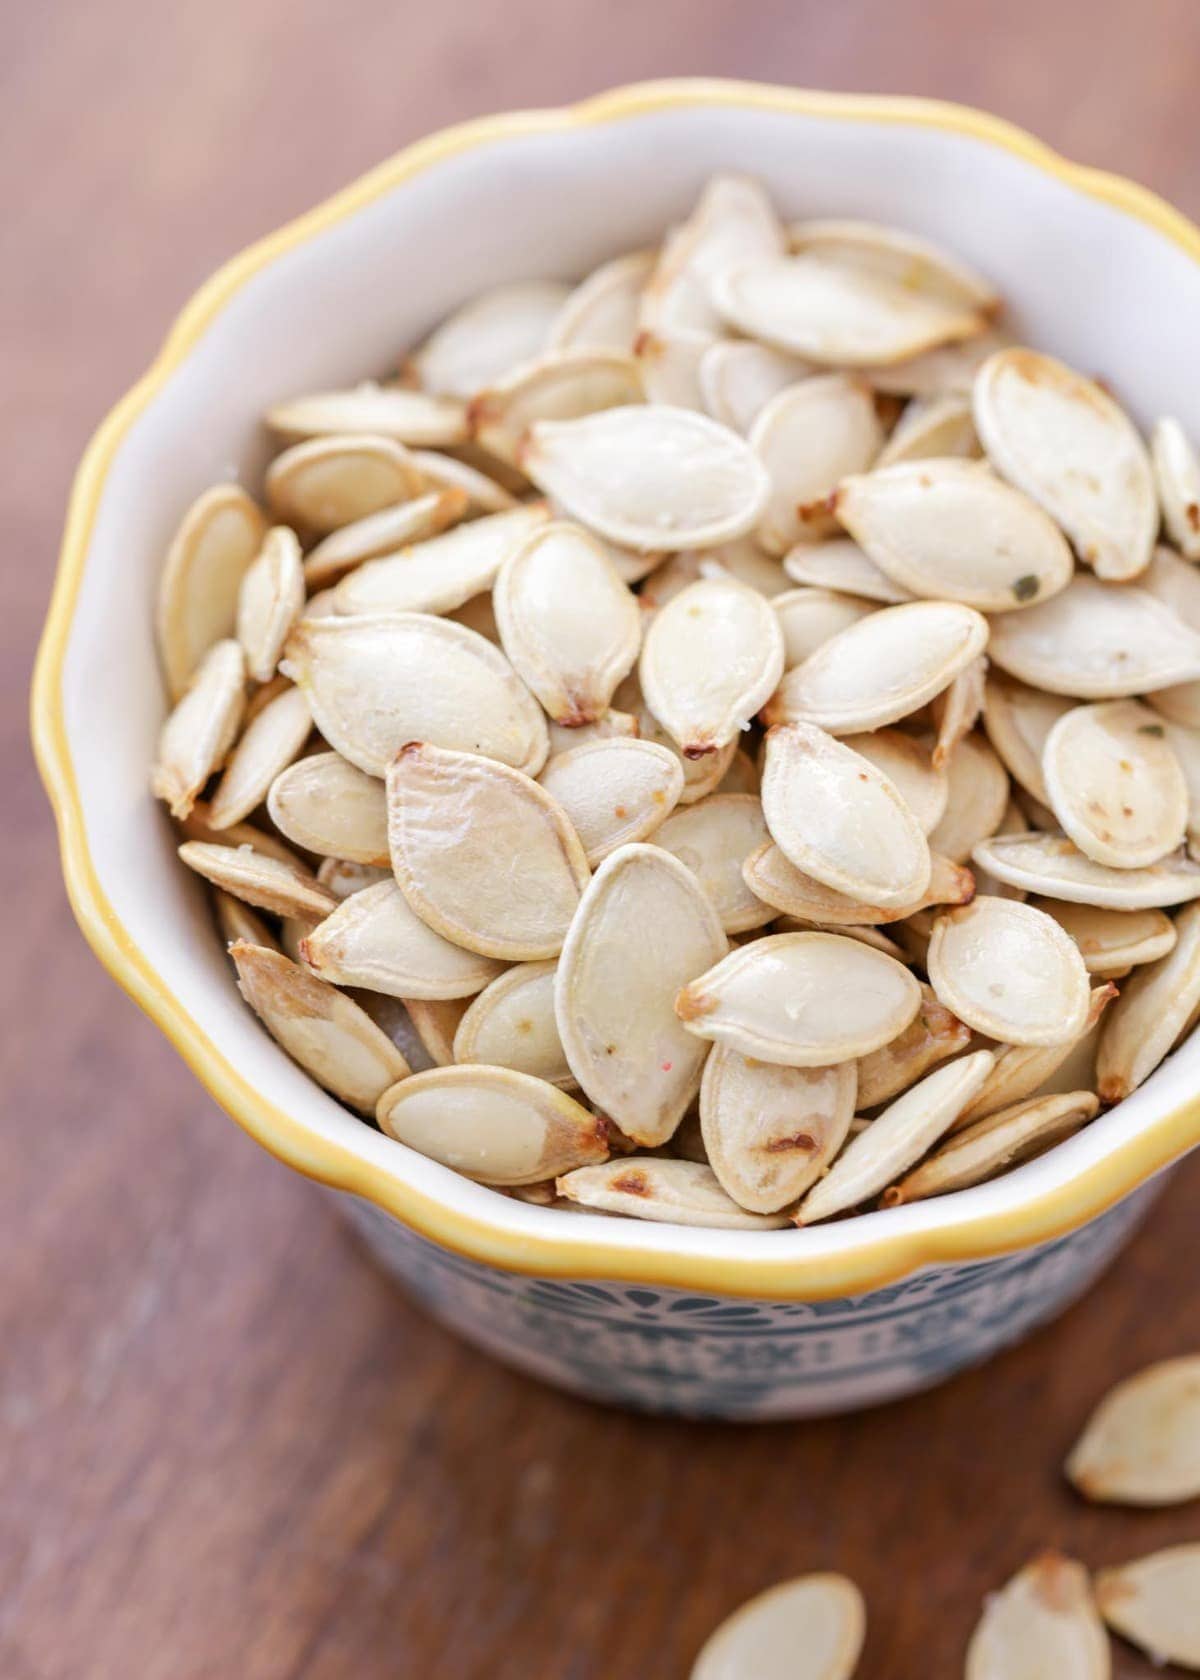 Toasted pumpkin seeds in a small dish